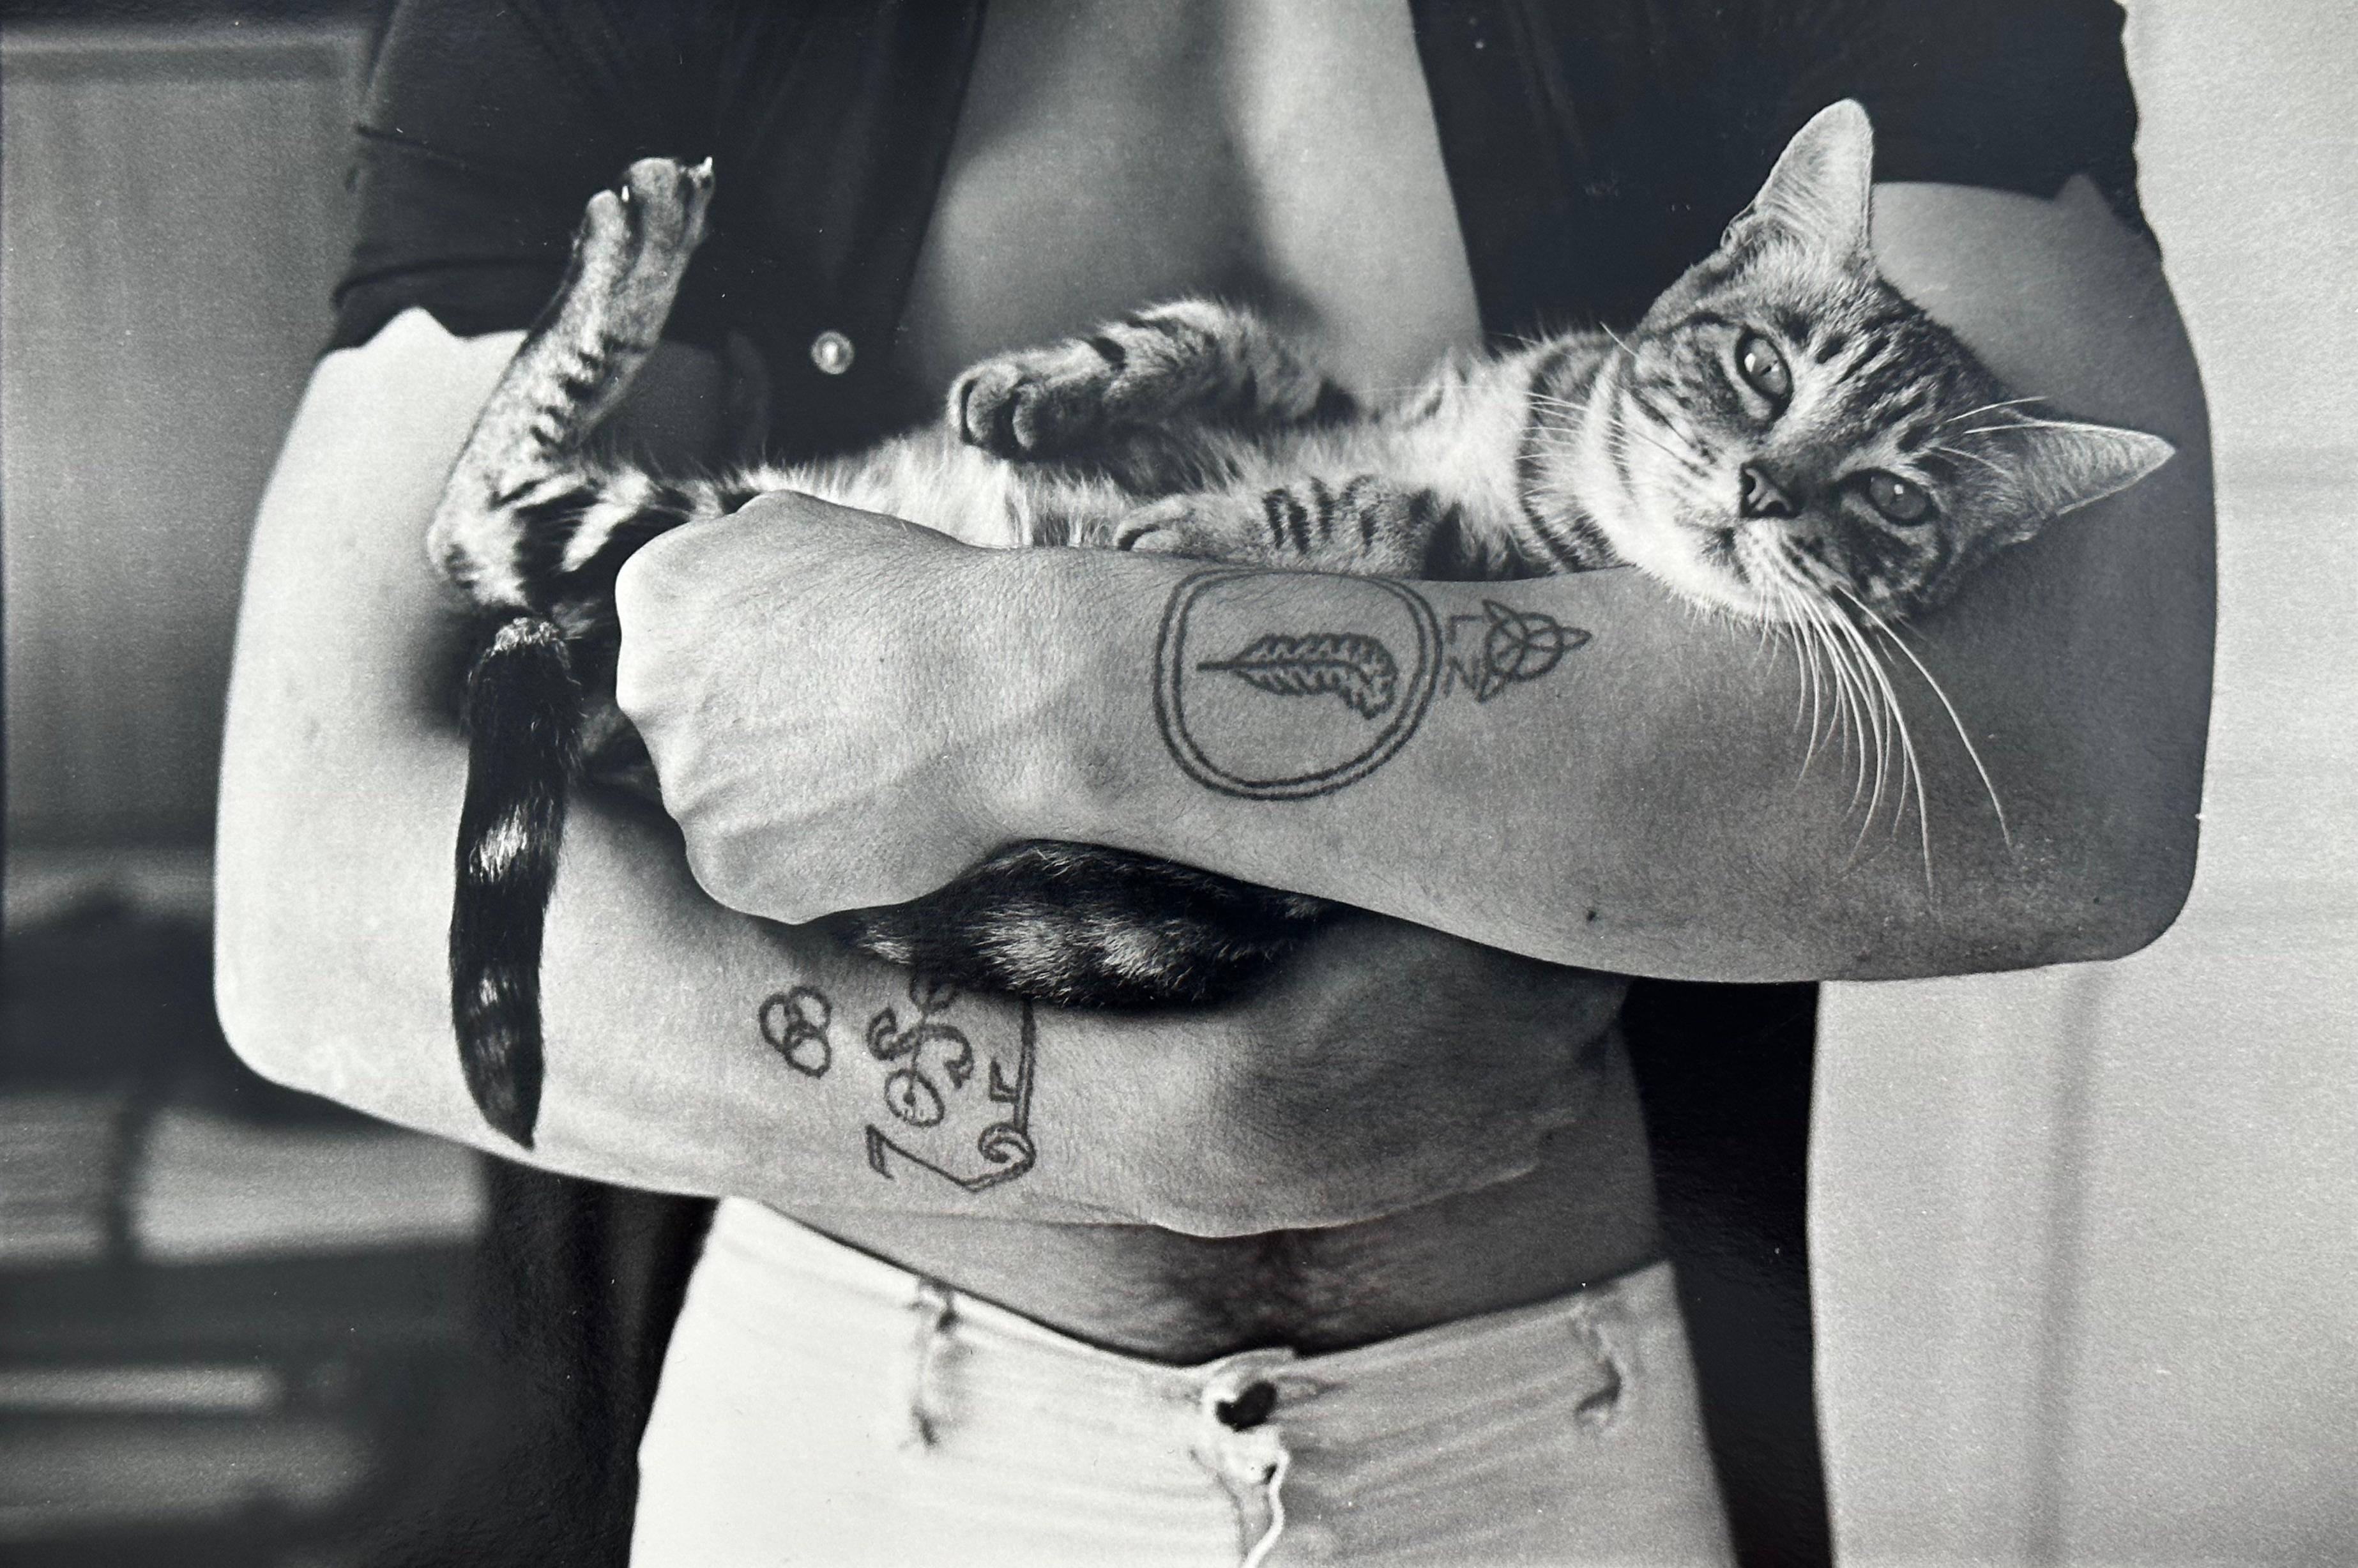 Black and White Photograph Christopher Makos - Homme avec chat